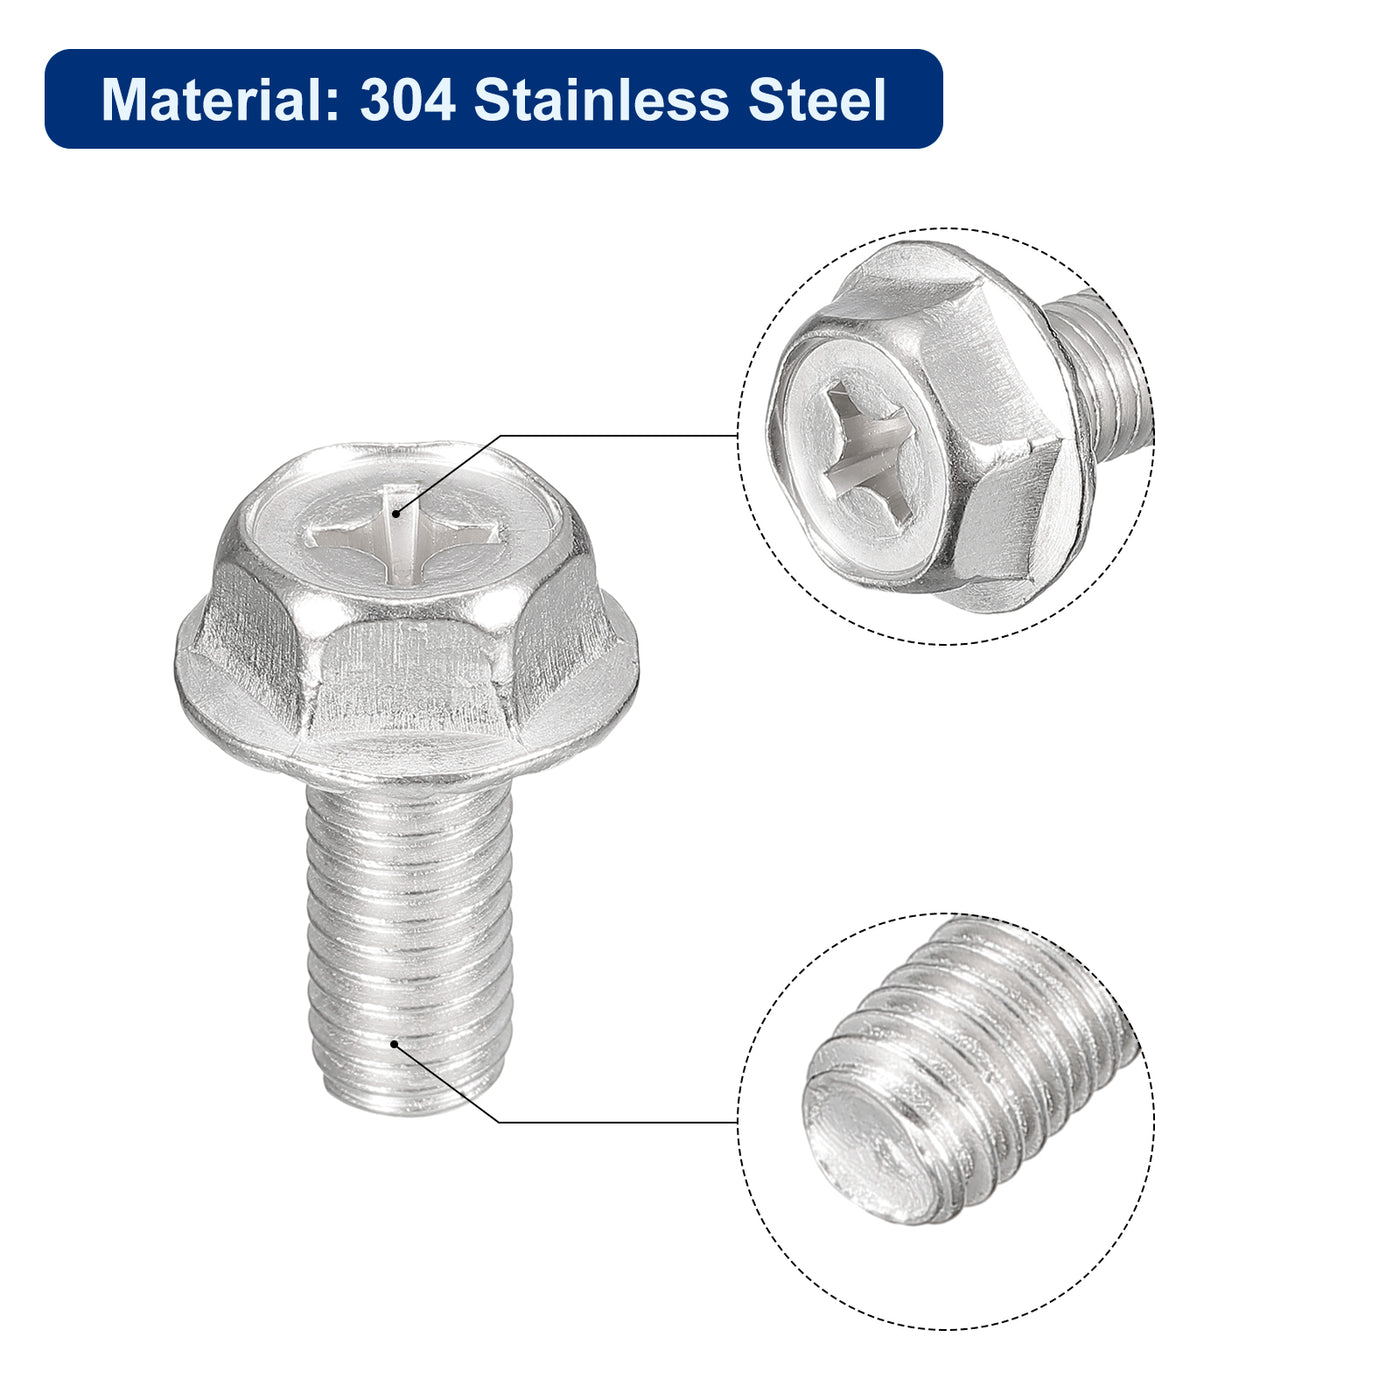 uxcell Uxcell M8x18mm Phillips Hex Head Flange Bolts, 10pcs 304 Stainless Steel Screws